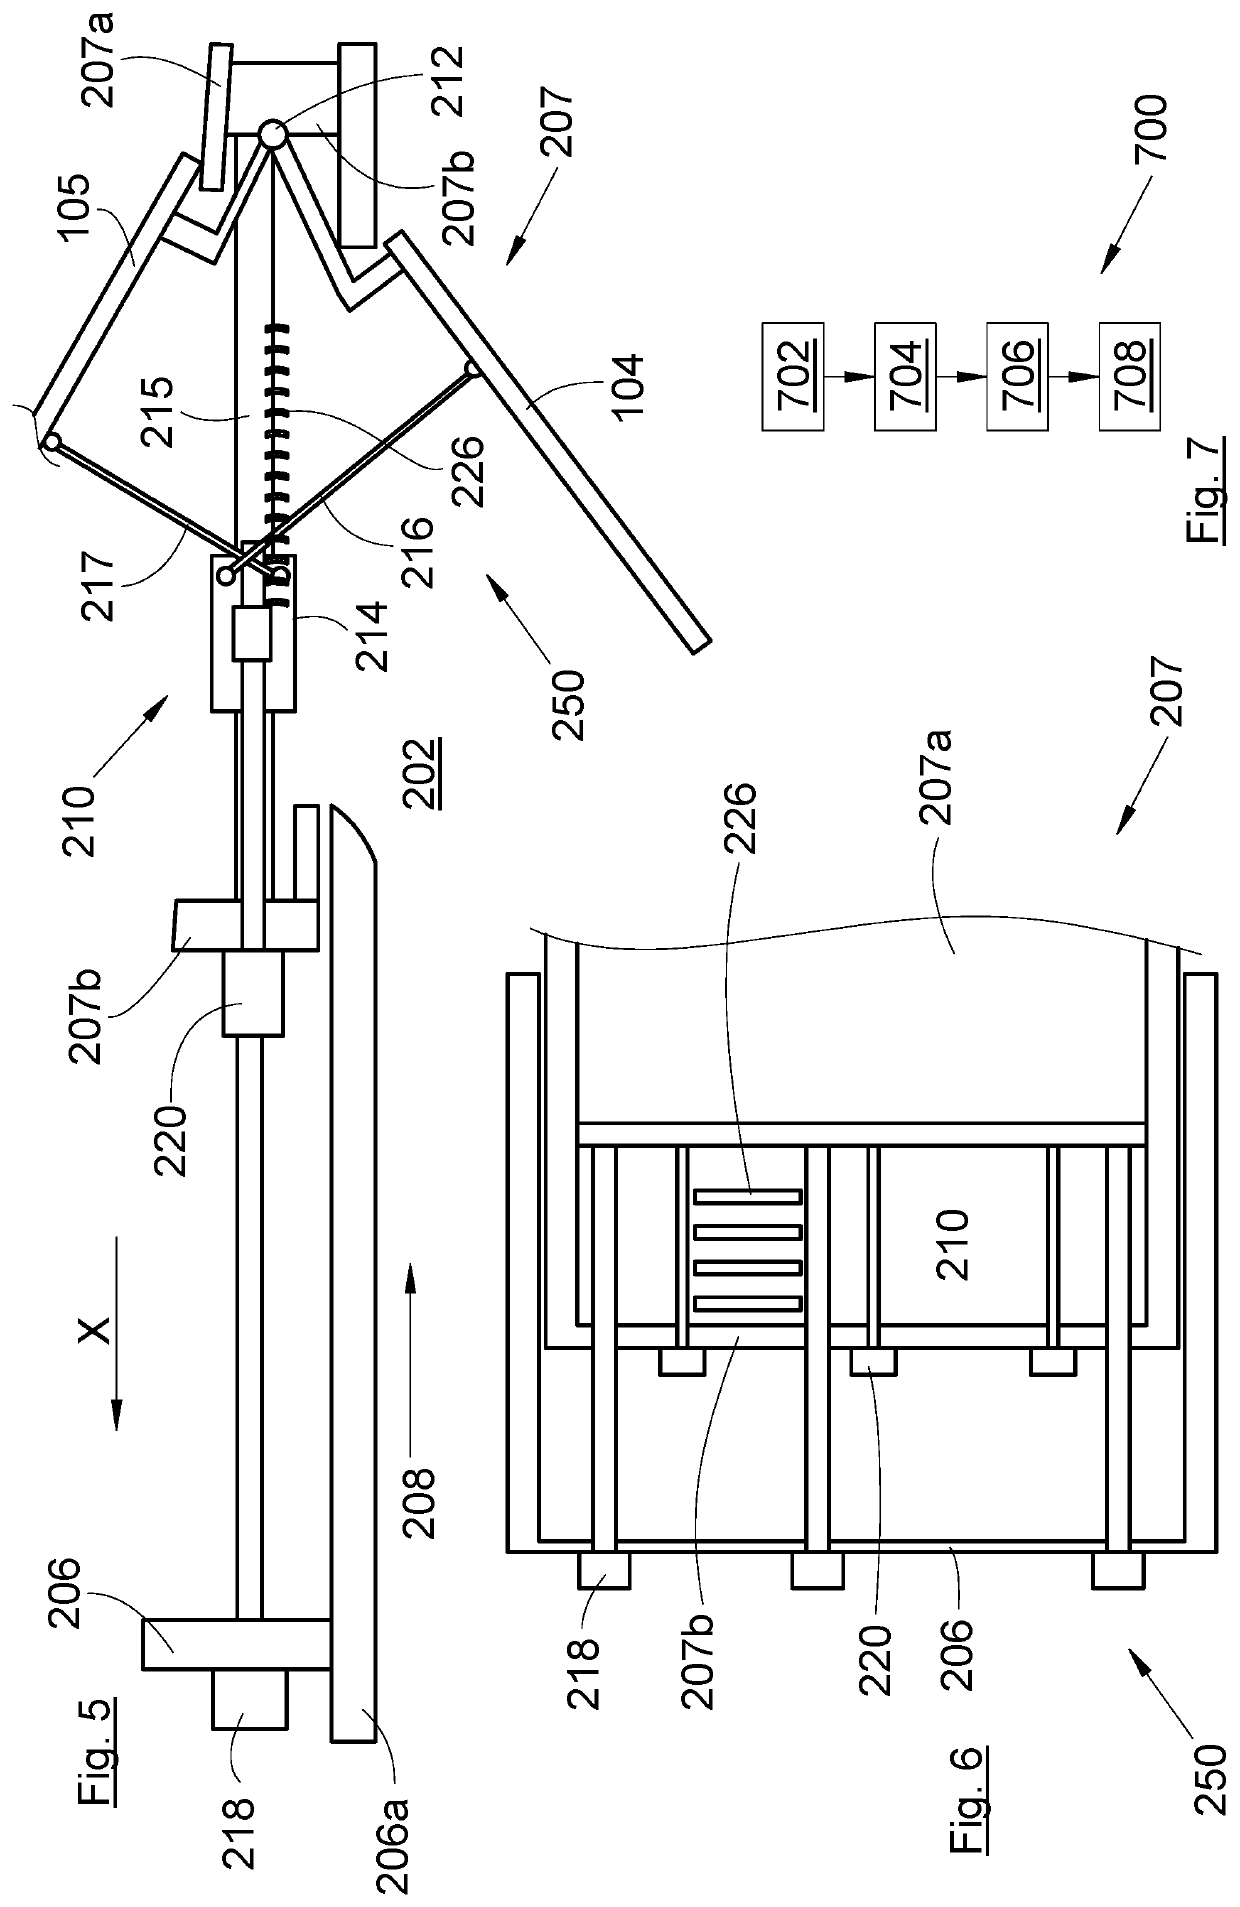 Jet engine comprising a nacelle equipped with a thrust reversing system comprising doors